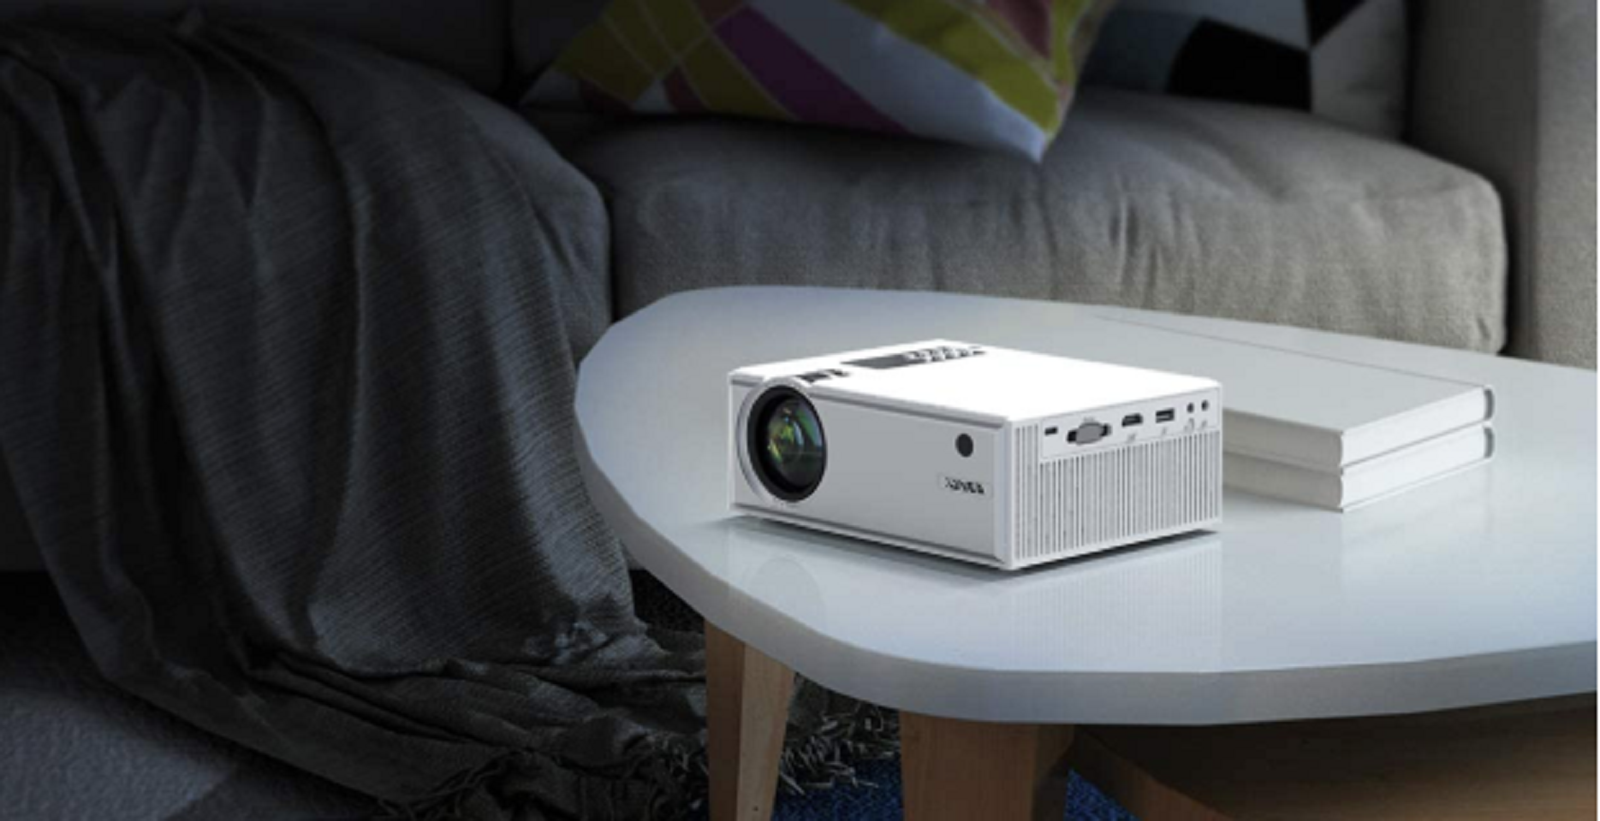 Hands on with the Yaber Y61 projector an ultra-portable 5500 lumens home theatre projector zdnet